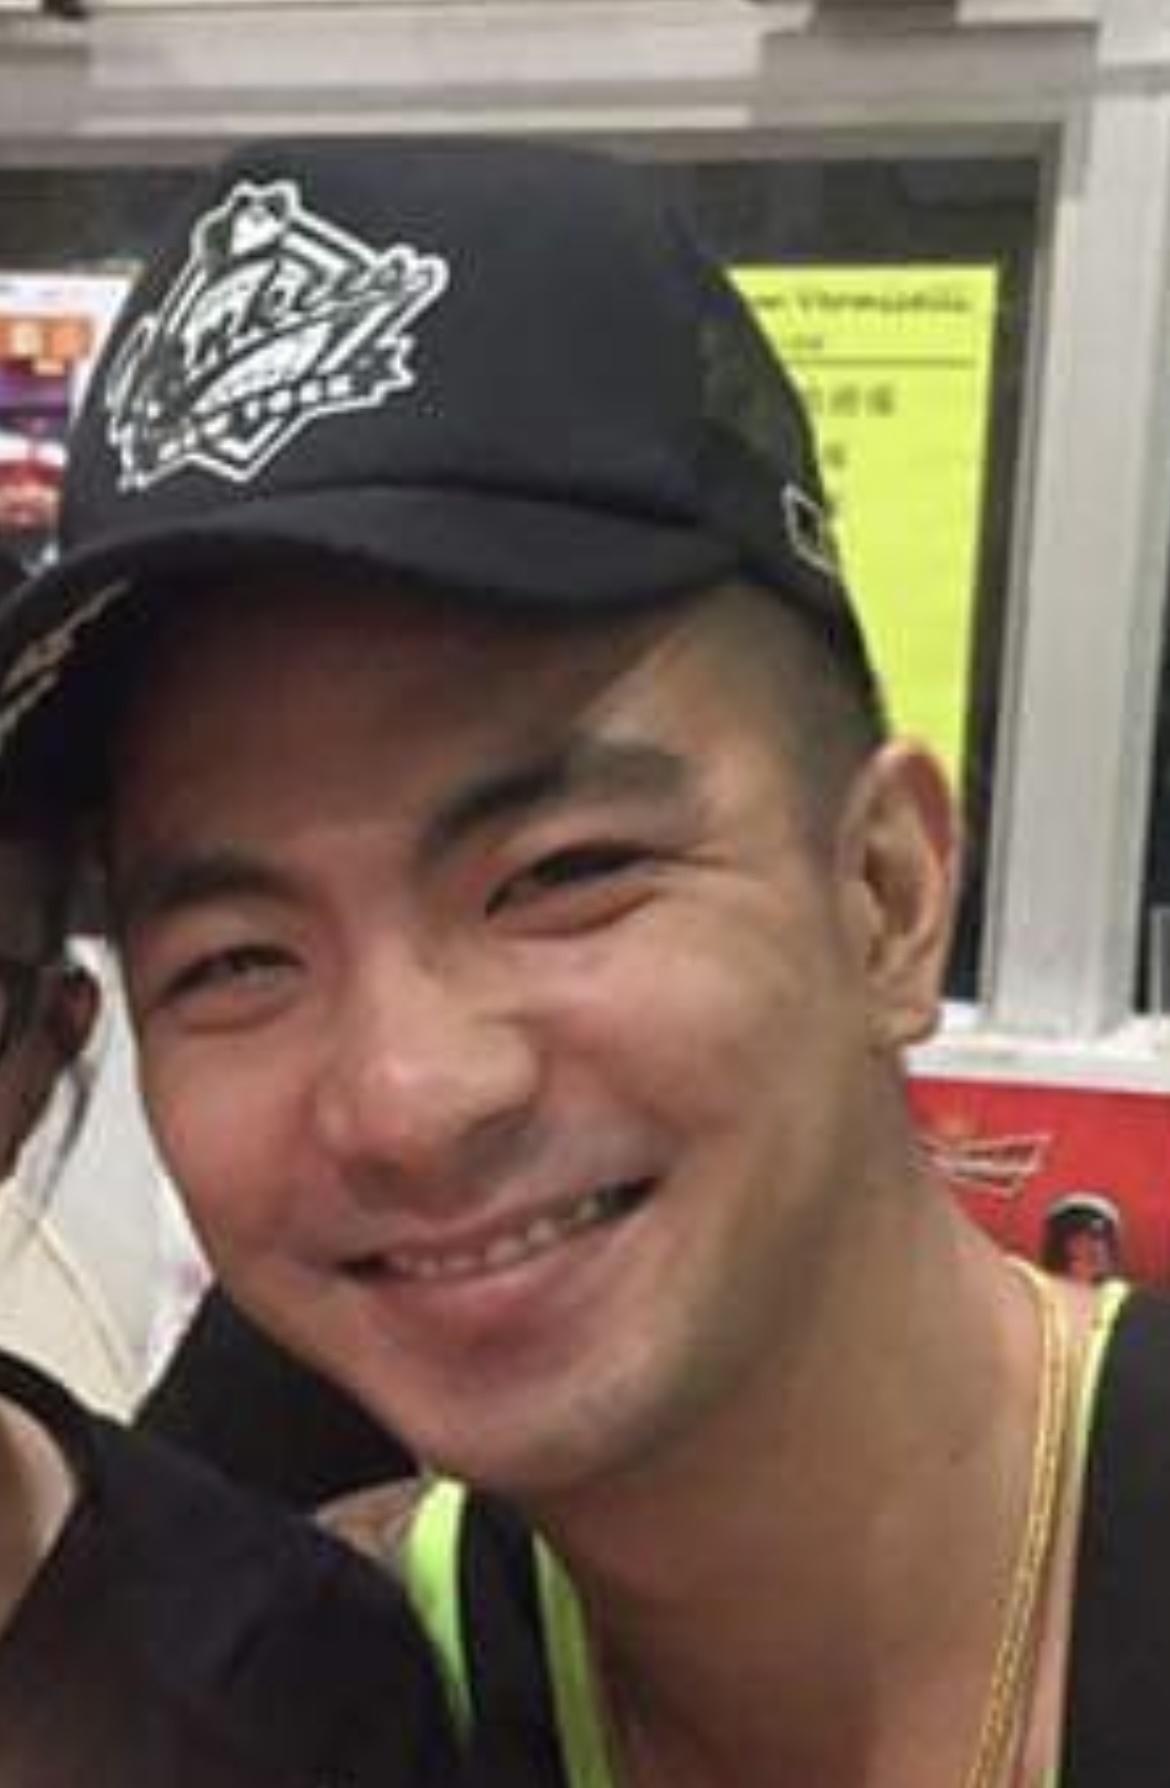 Cheng Nin-tsun, aged 34, is about 1.75 metres tall, 80 kilograms in weight and of medium build. He has a round face with yellow complexion and short black hair. He was last seen wearing a black cap, a black vest, black trousers, black and white shoes and carrying a black sling bag.